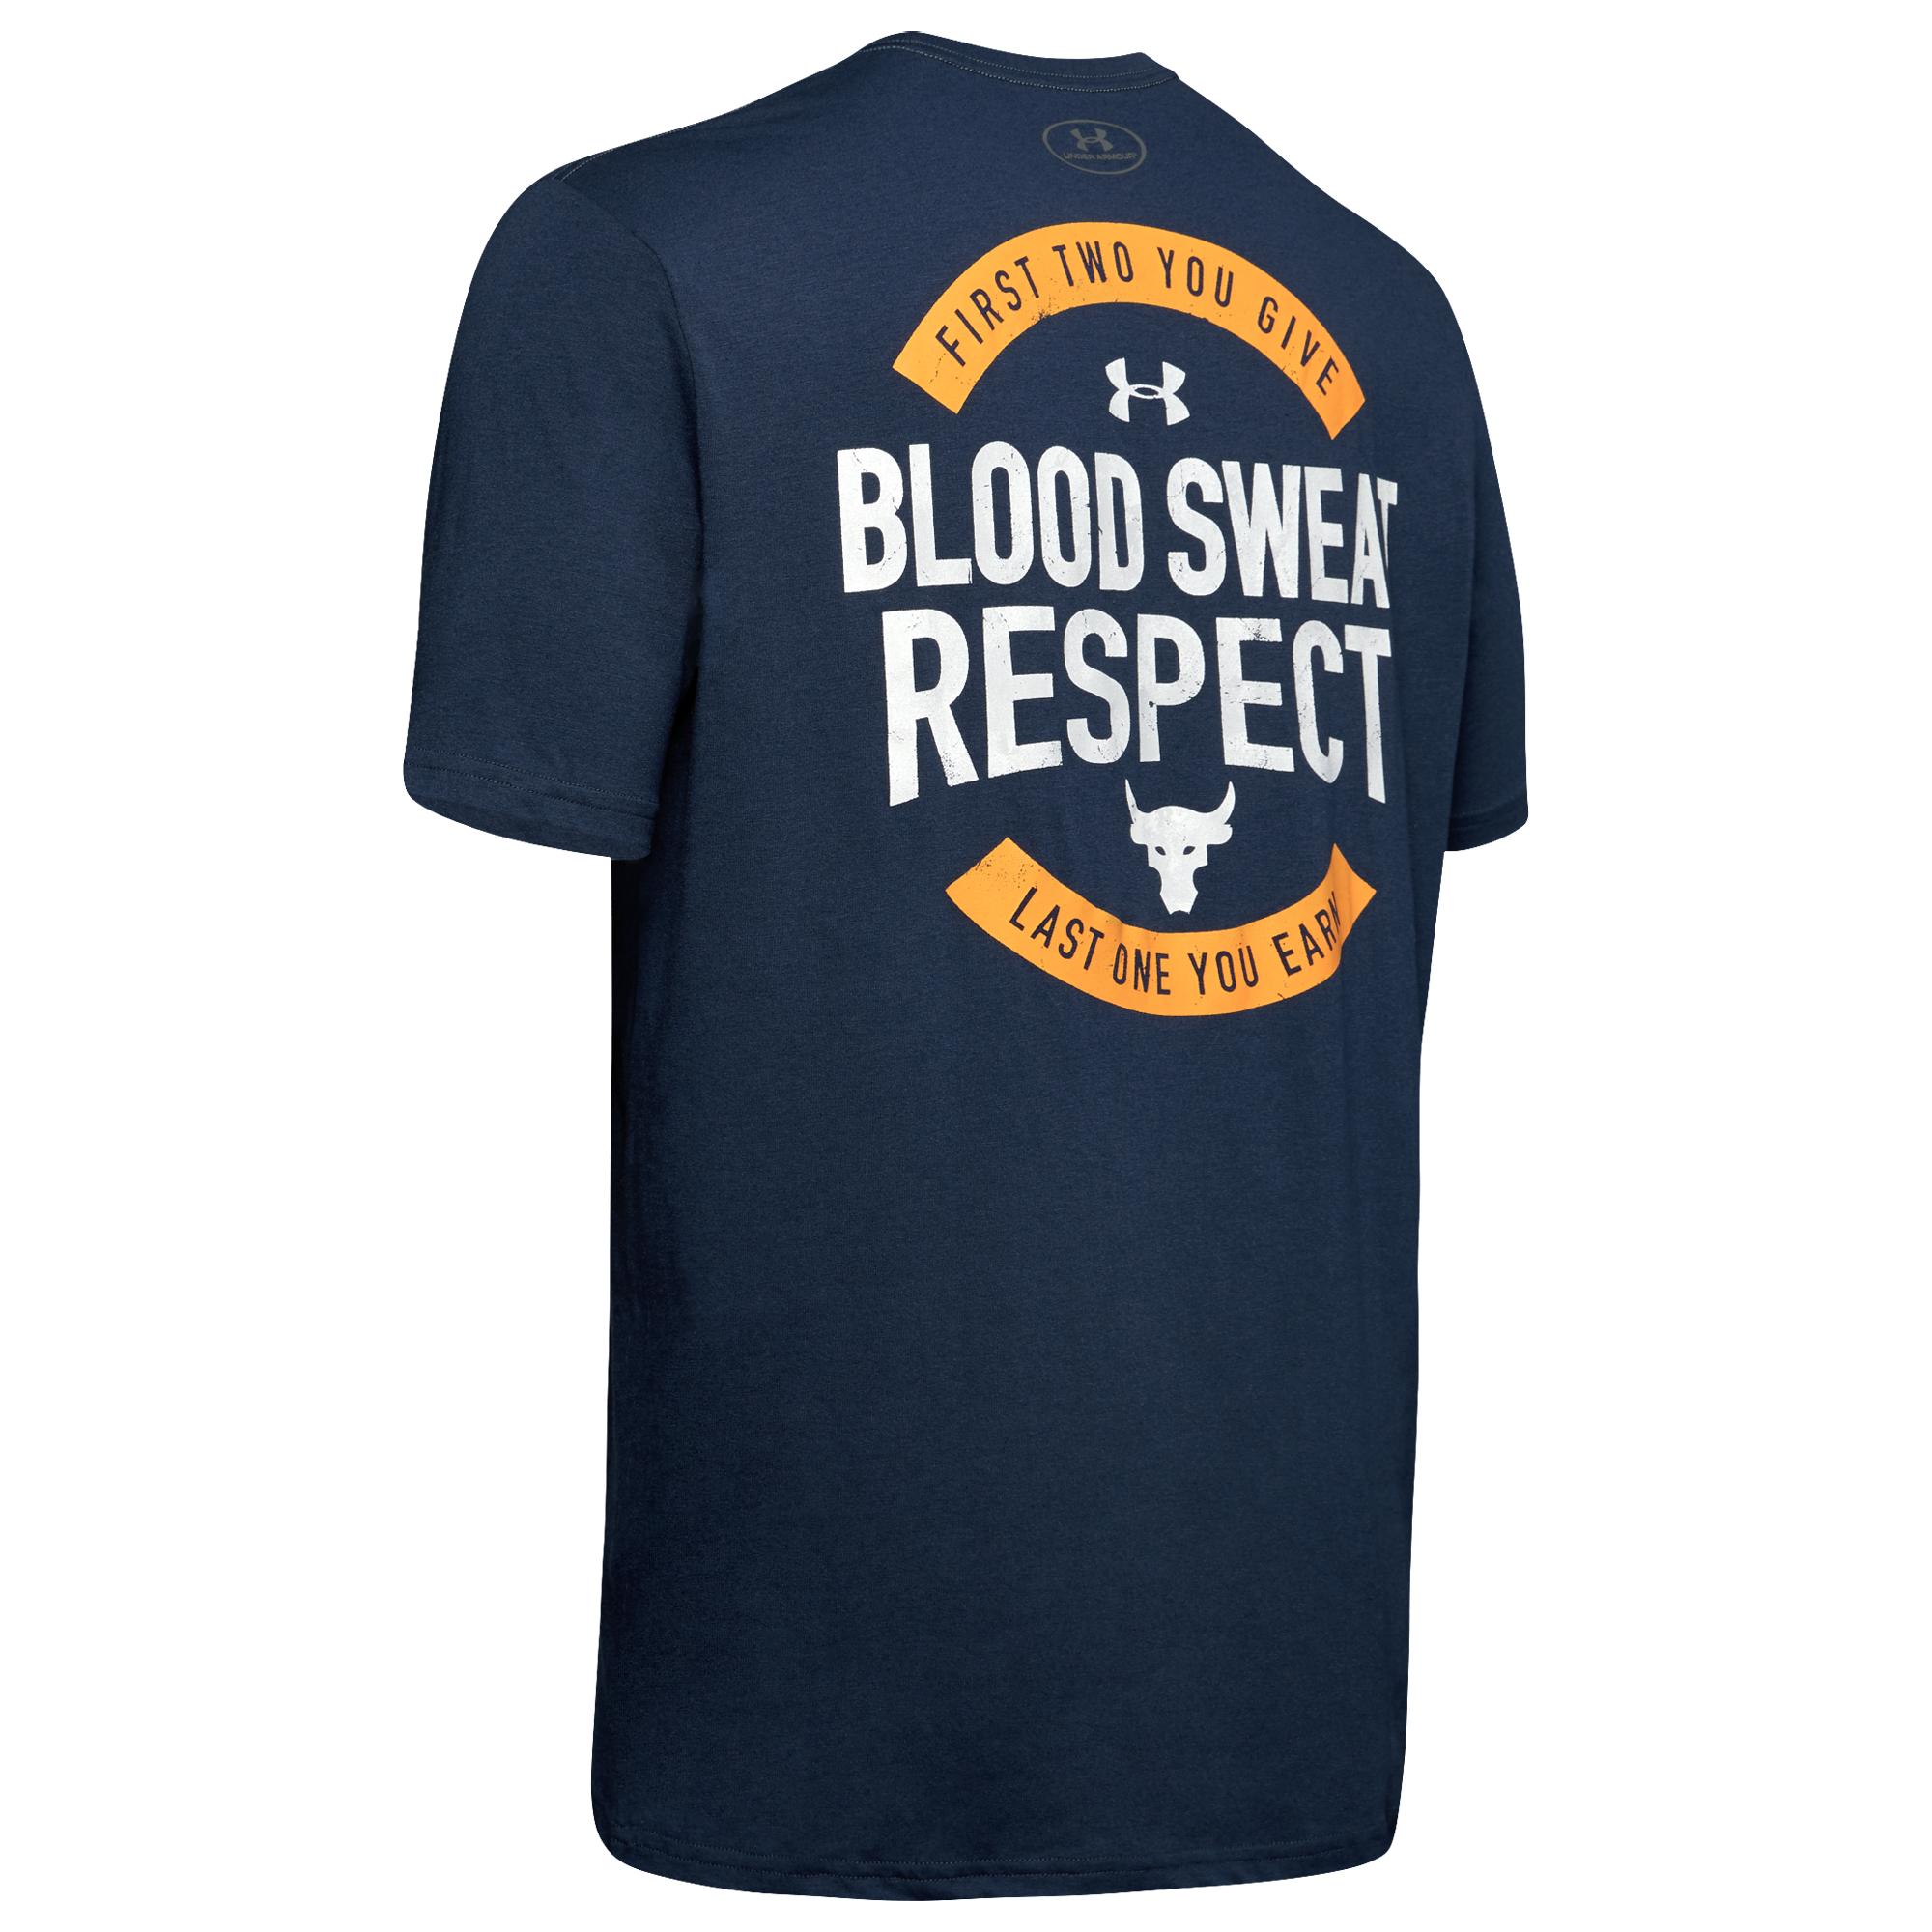 blood sweat and respect t shirt Shop Clothing & Shoes Online